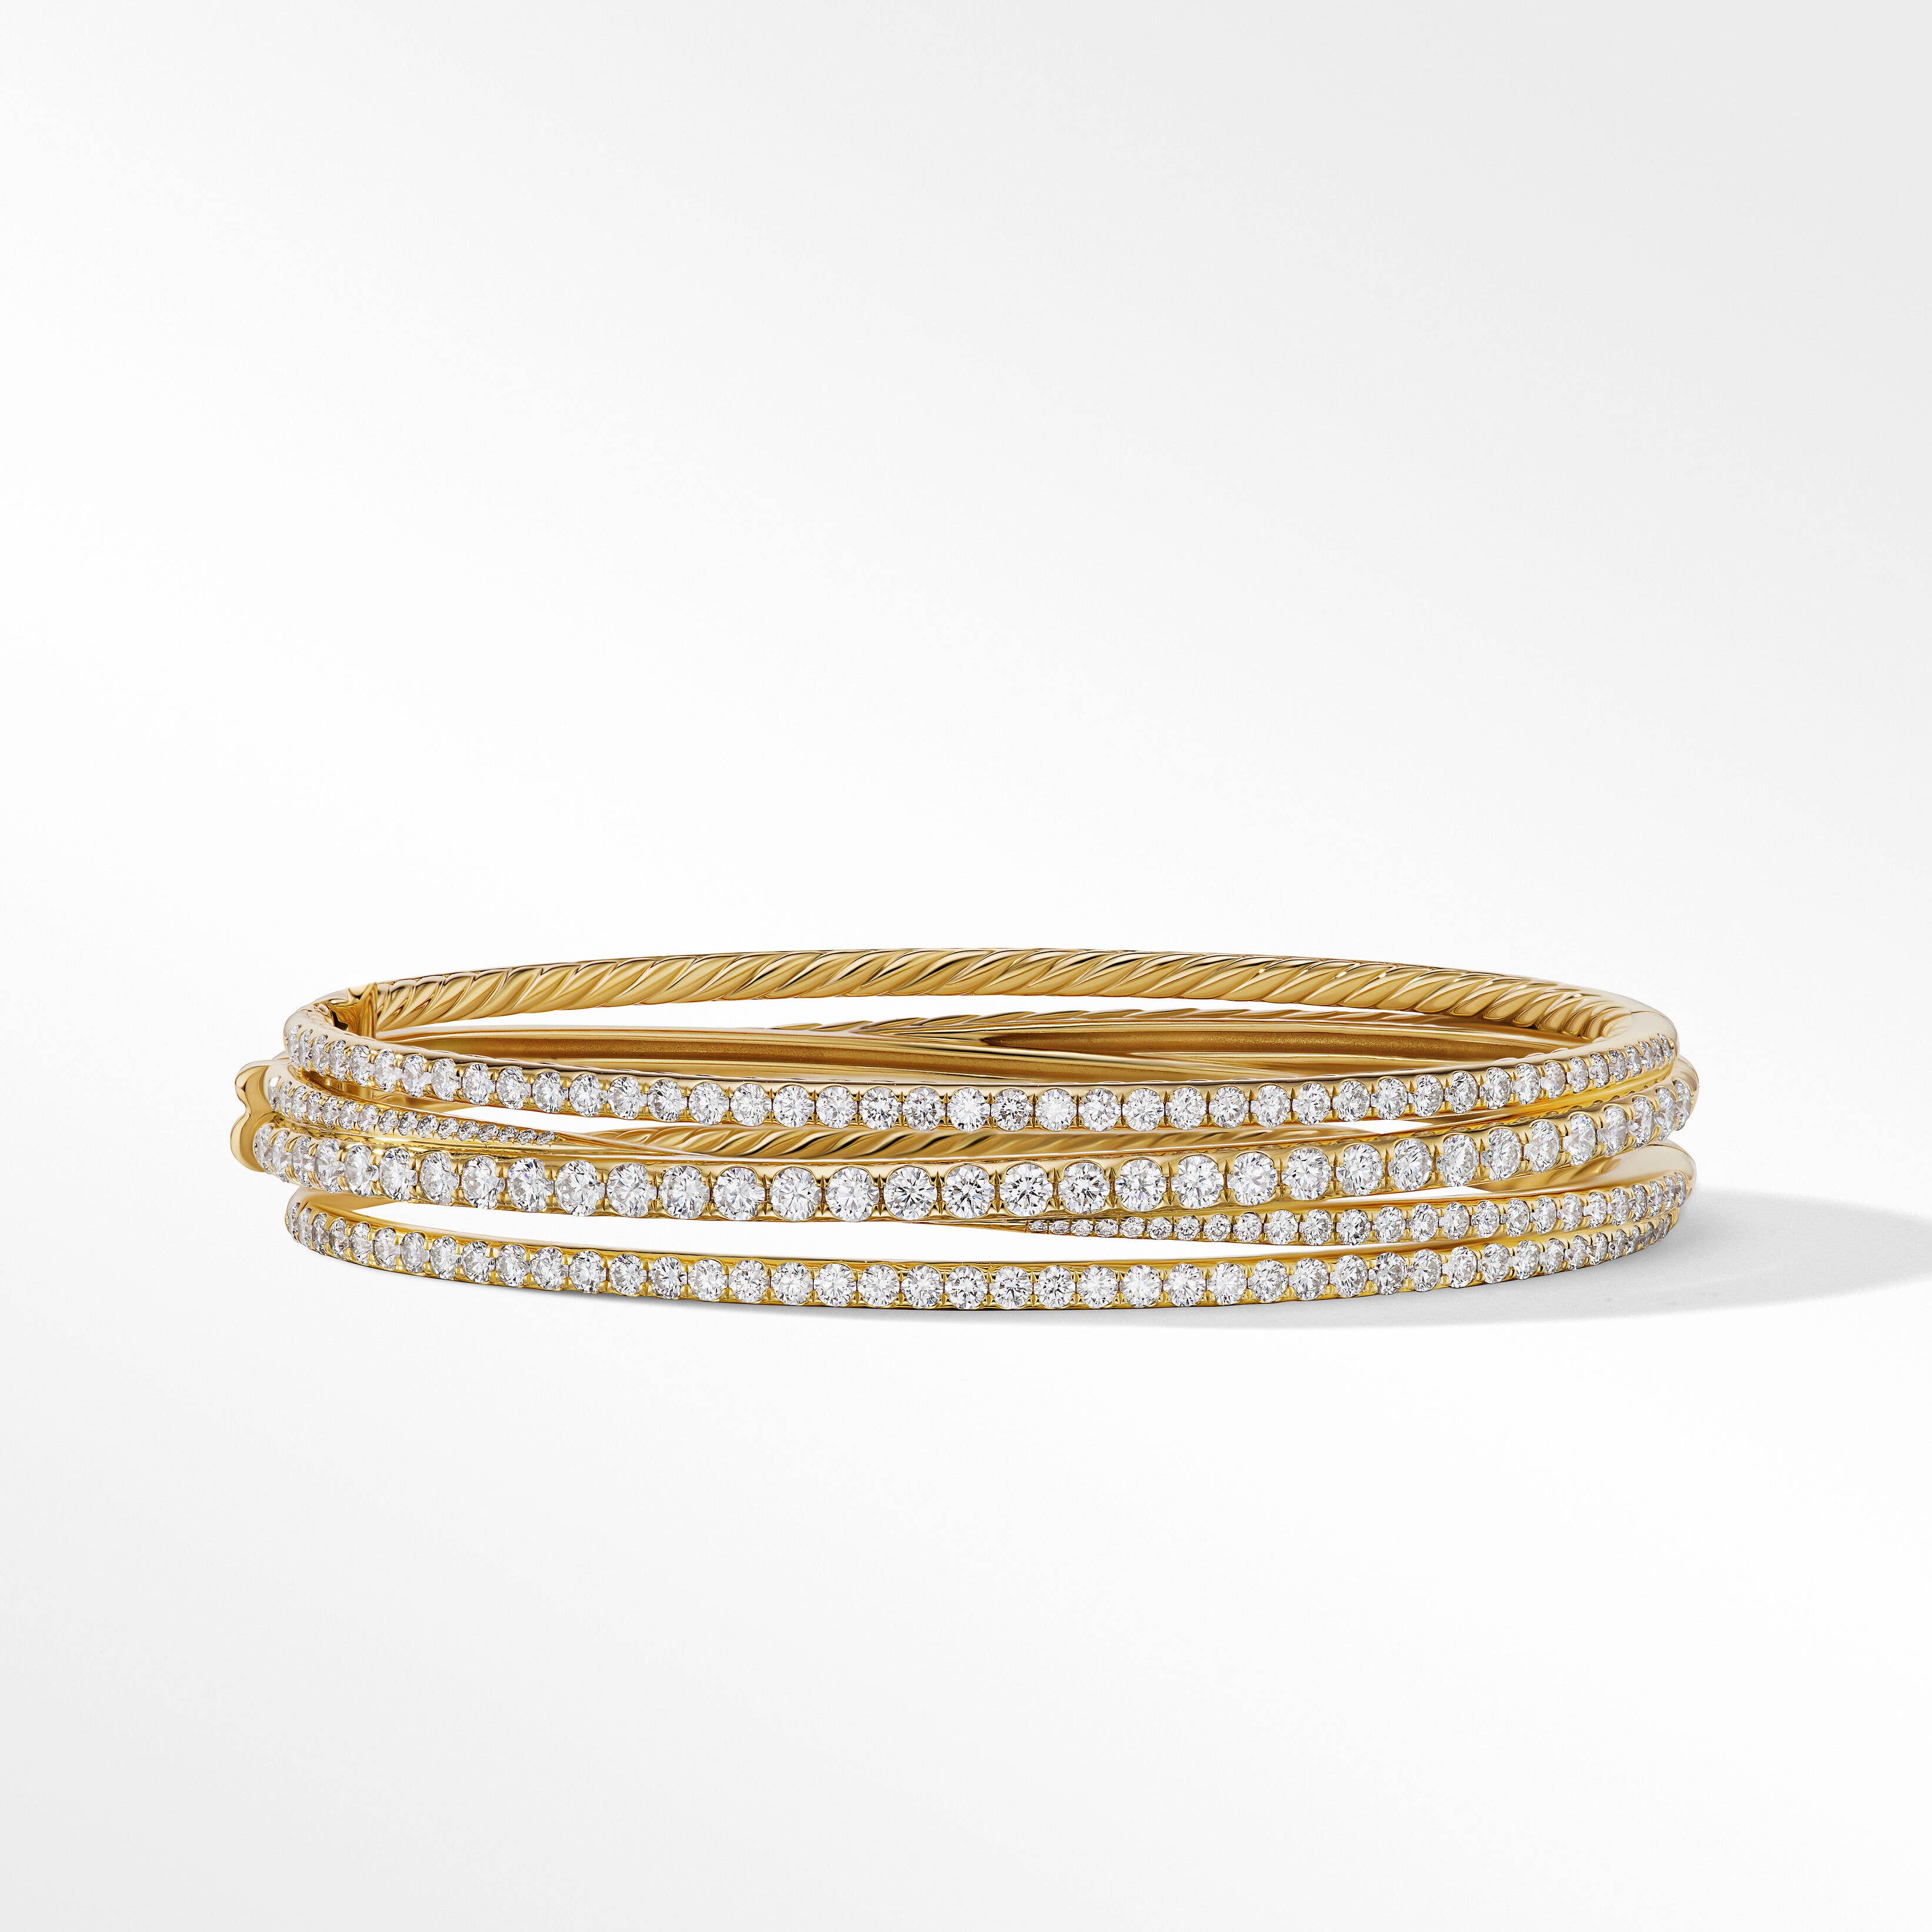 Pavé Crossover Four Row Bracelet in 18K Yellow Gold with Diamonds